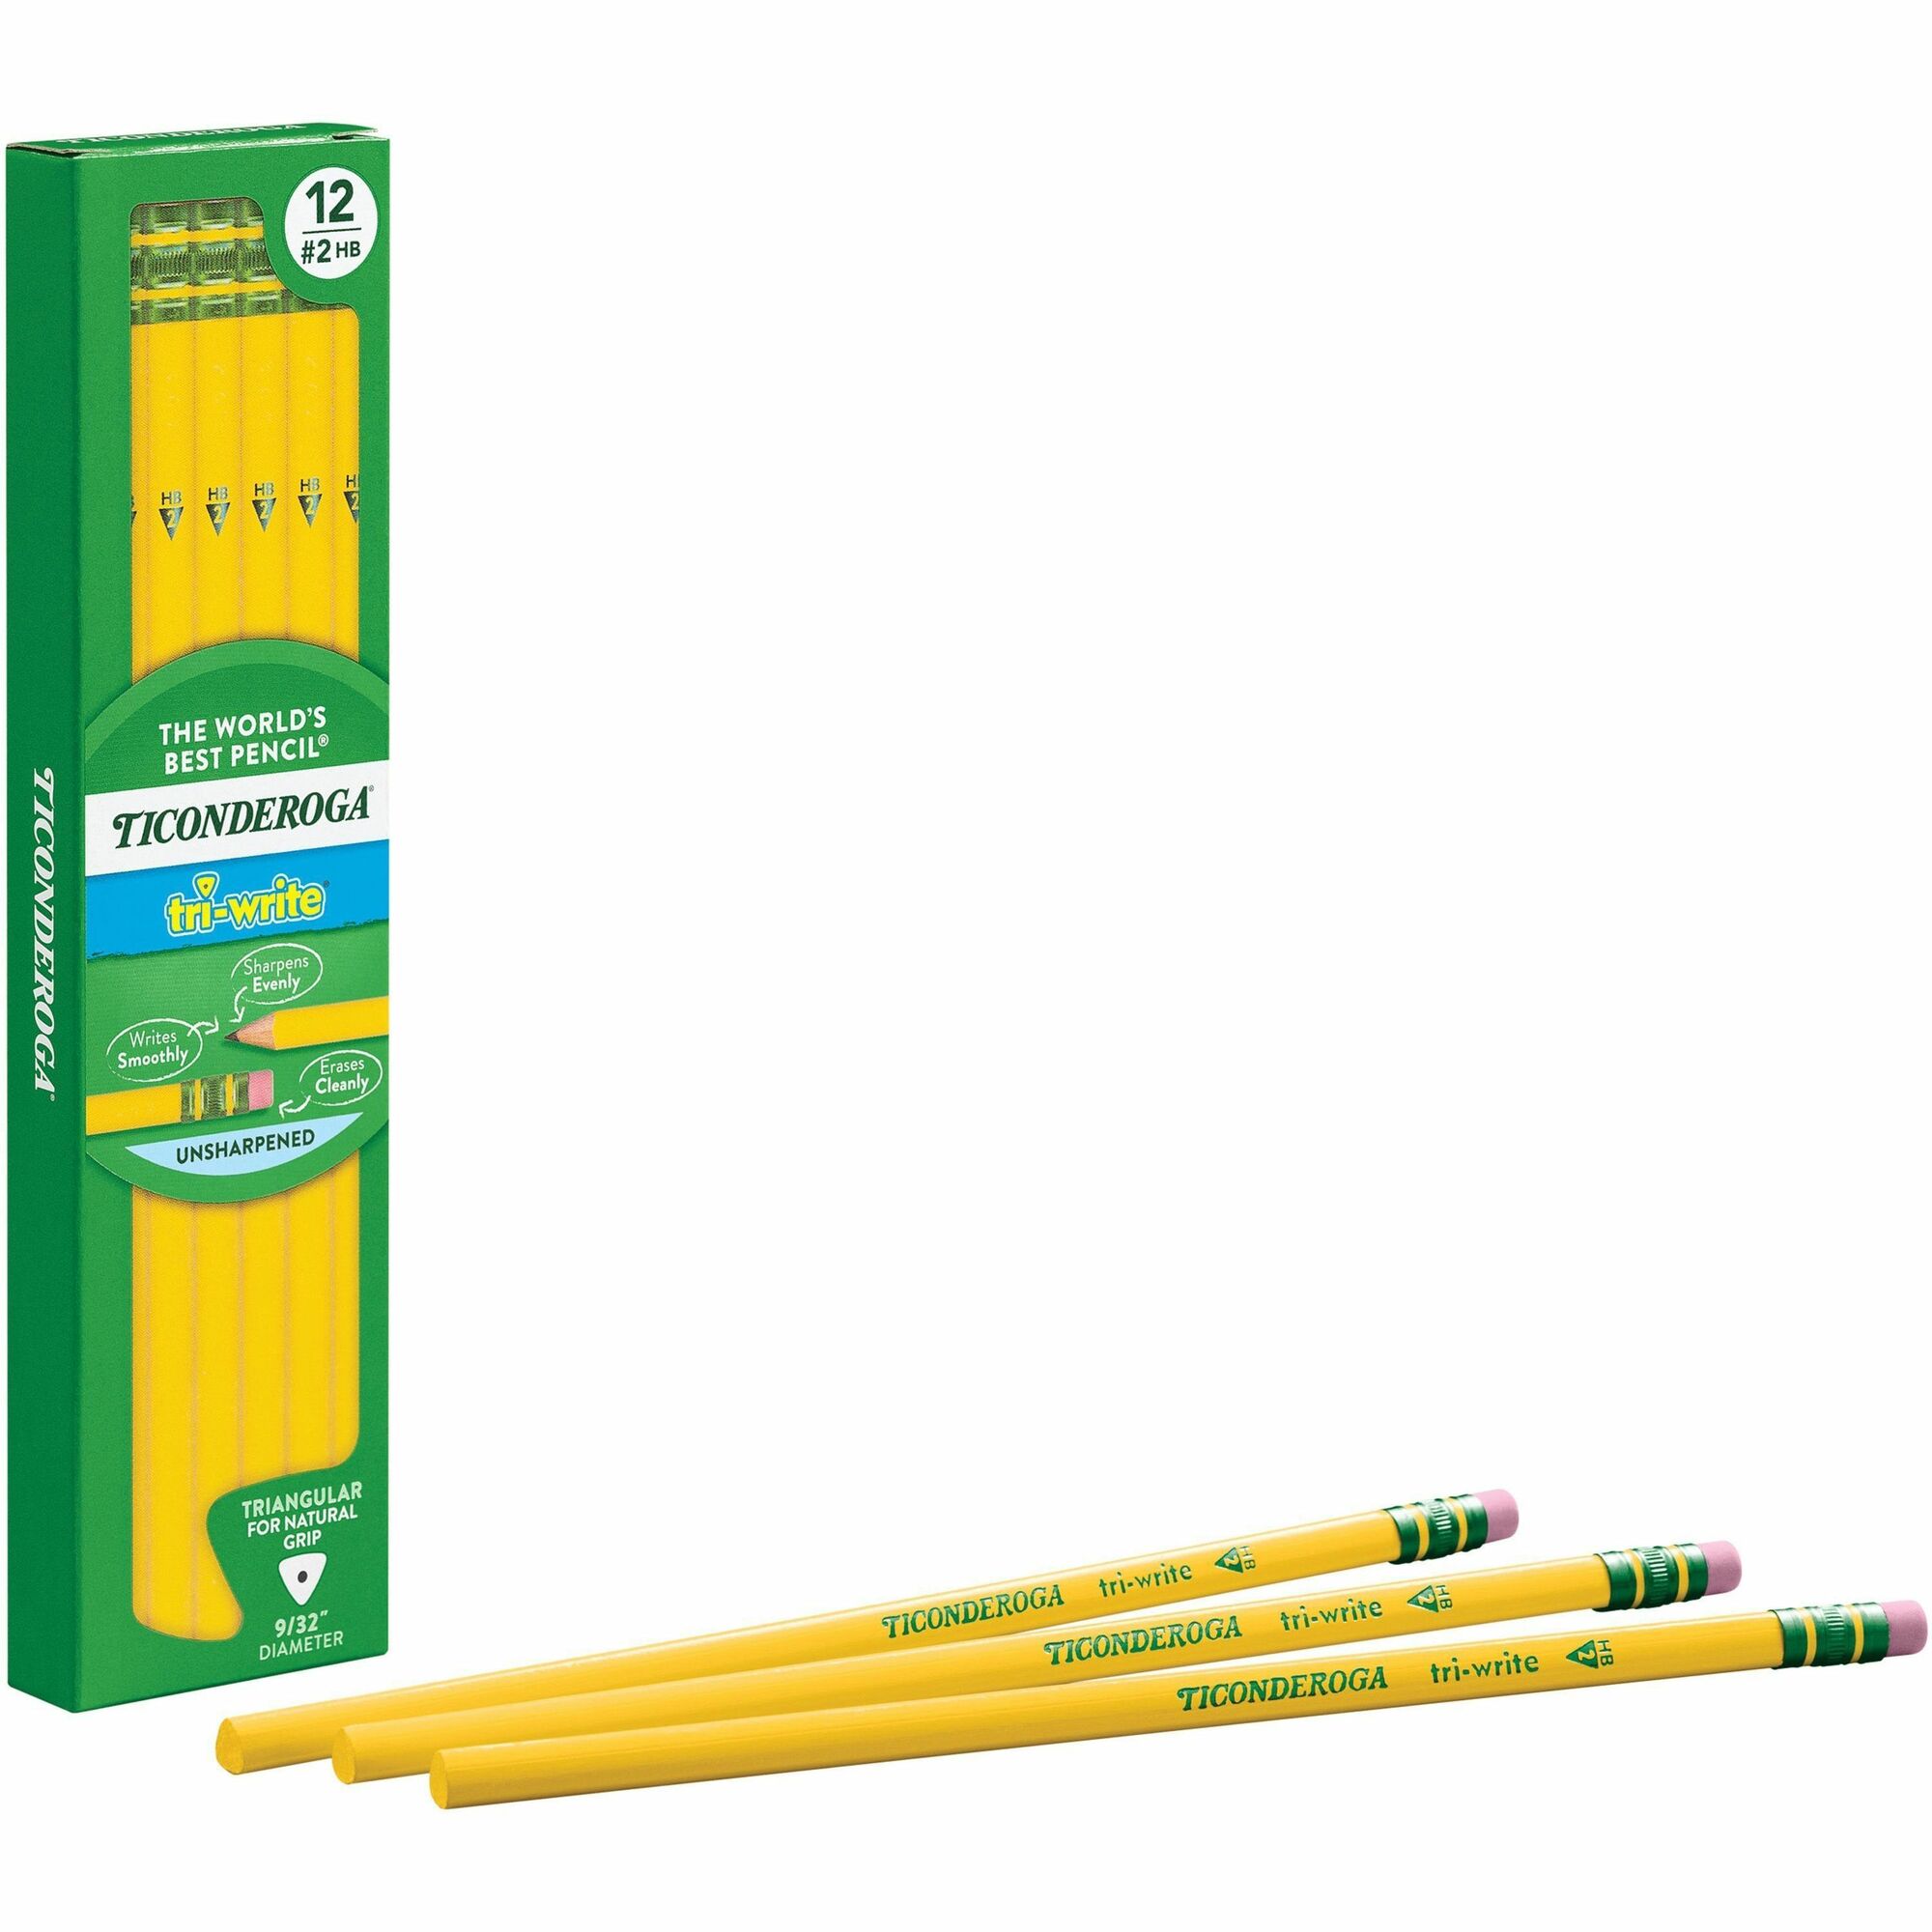 West Coast Office Supplies :: Office Supplies :: Writing & Correction ...